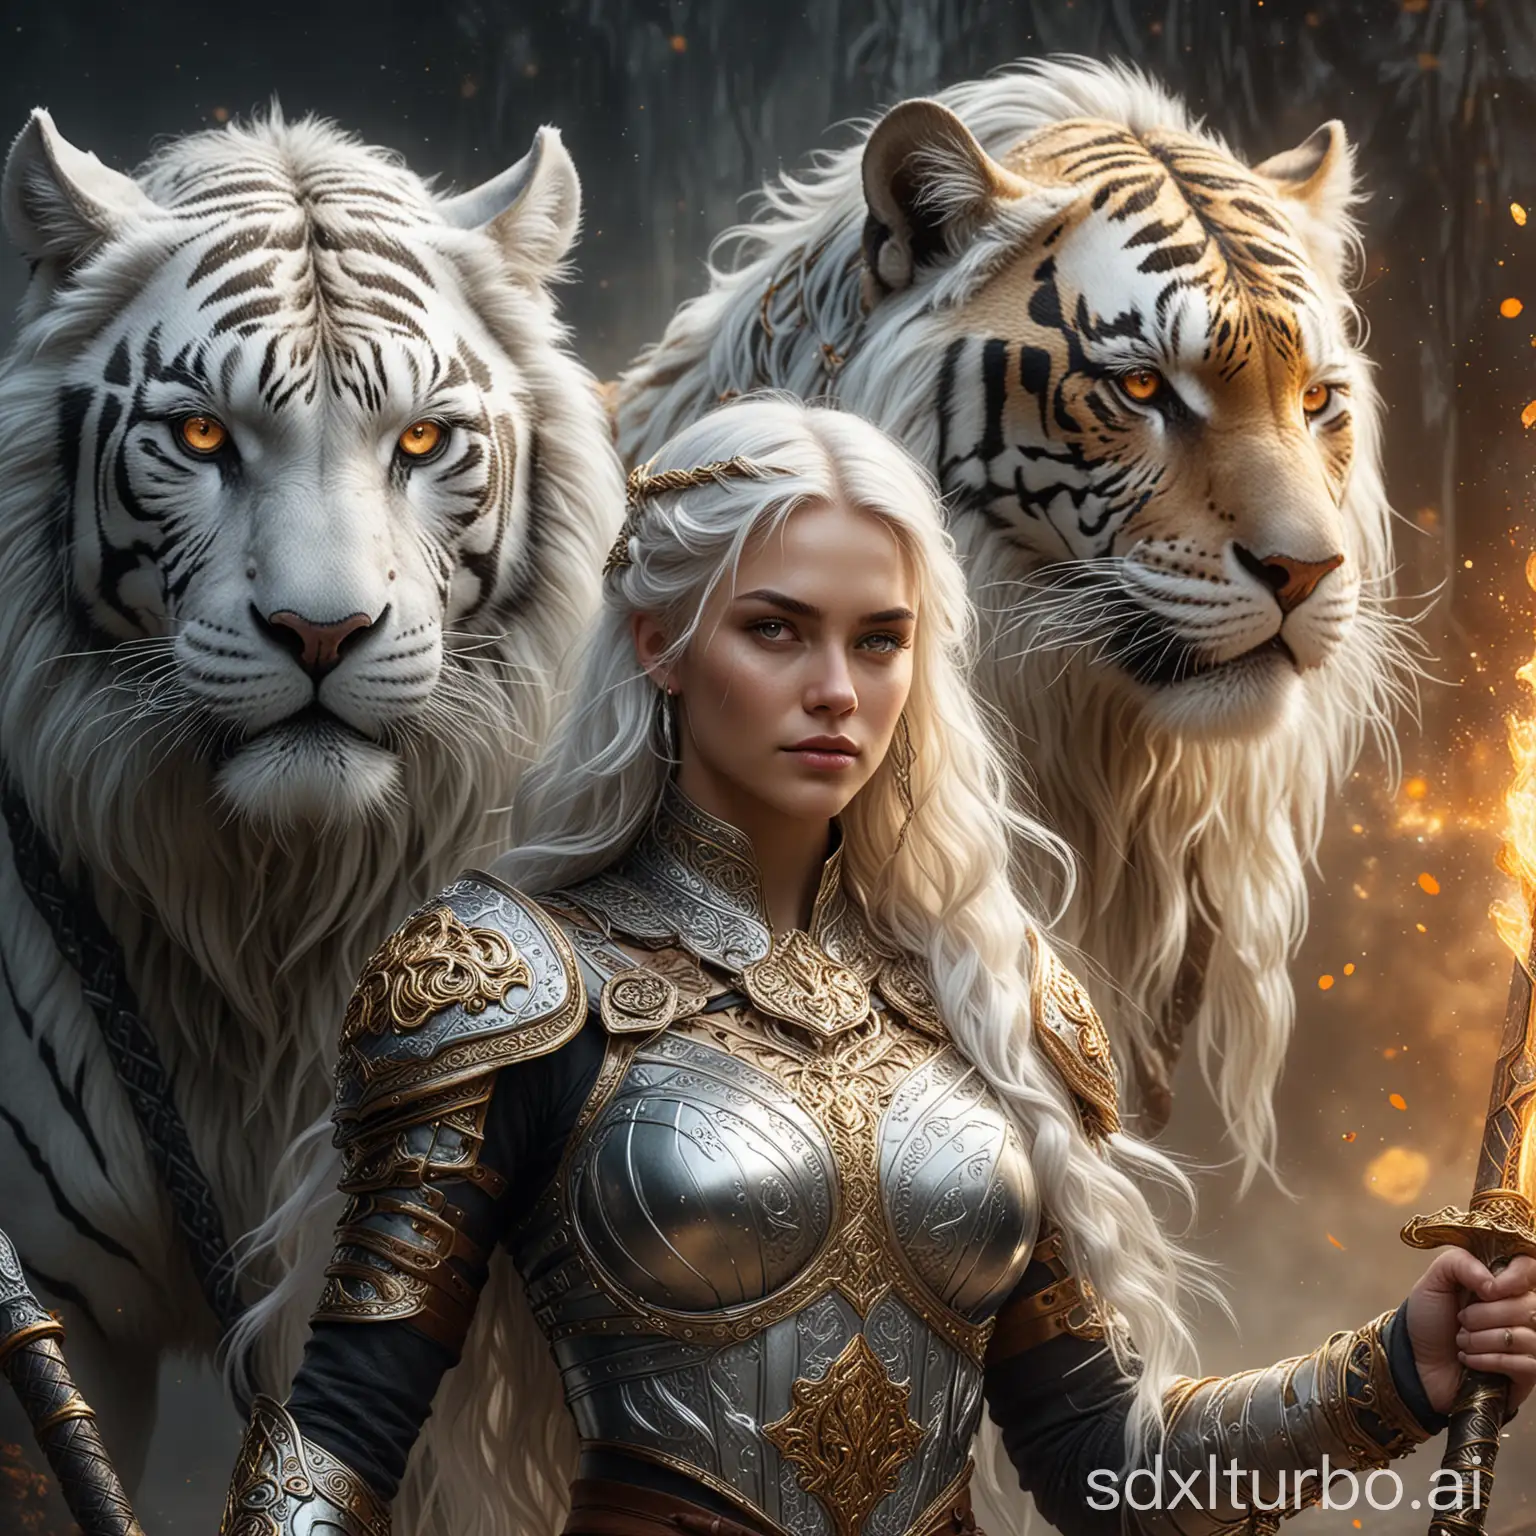 Create a mesmerizing digital artwork featuring a stunning female Viking adorned in silver armor with long wavy, layered white hair streaked with gold. She stands beside an intricate filigree tiger, wielding a flaming sword. Rendered in the style of alcohol ink and oil painting, use photorealistic hyperrealistic octane rendering to bring this UHD fantasy scene to life